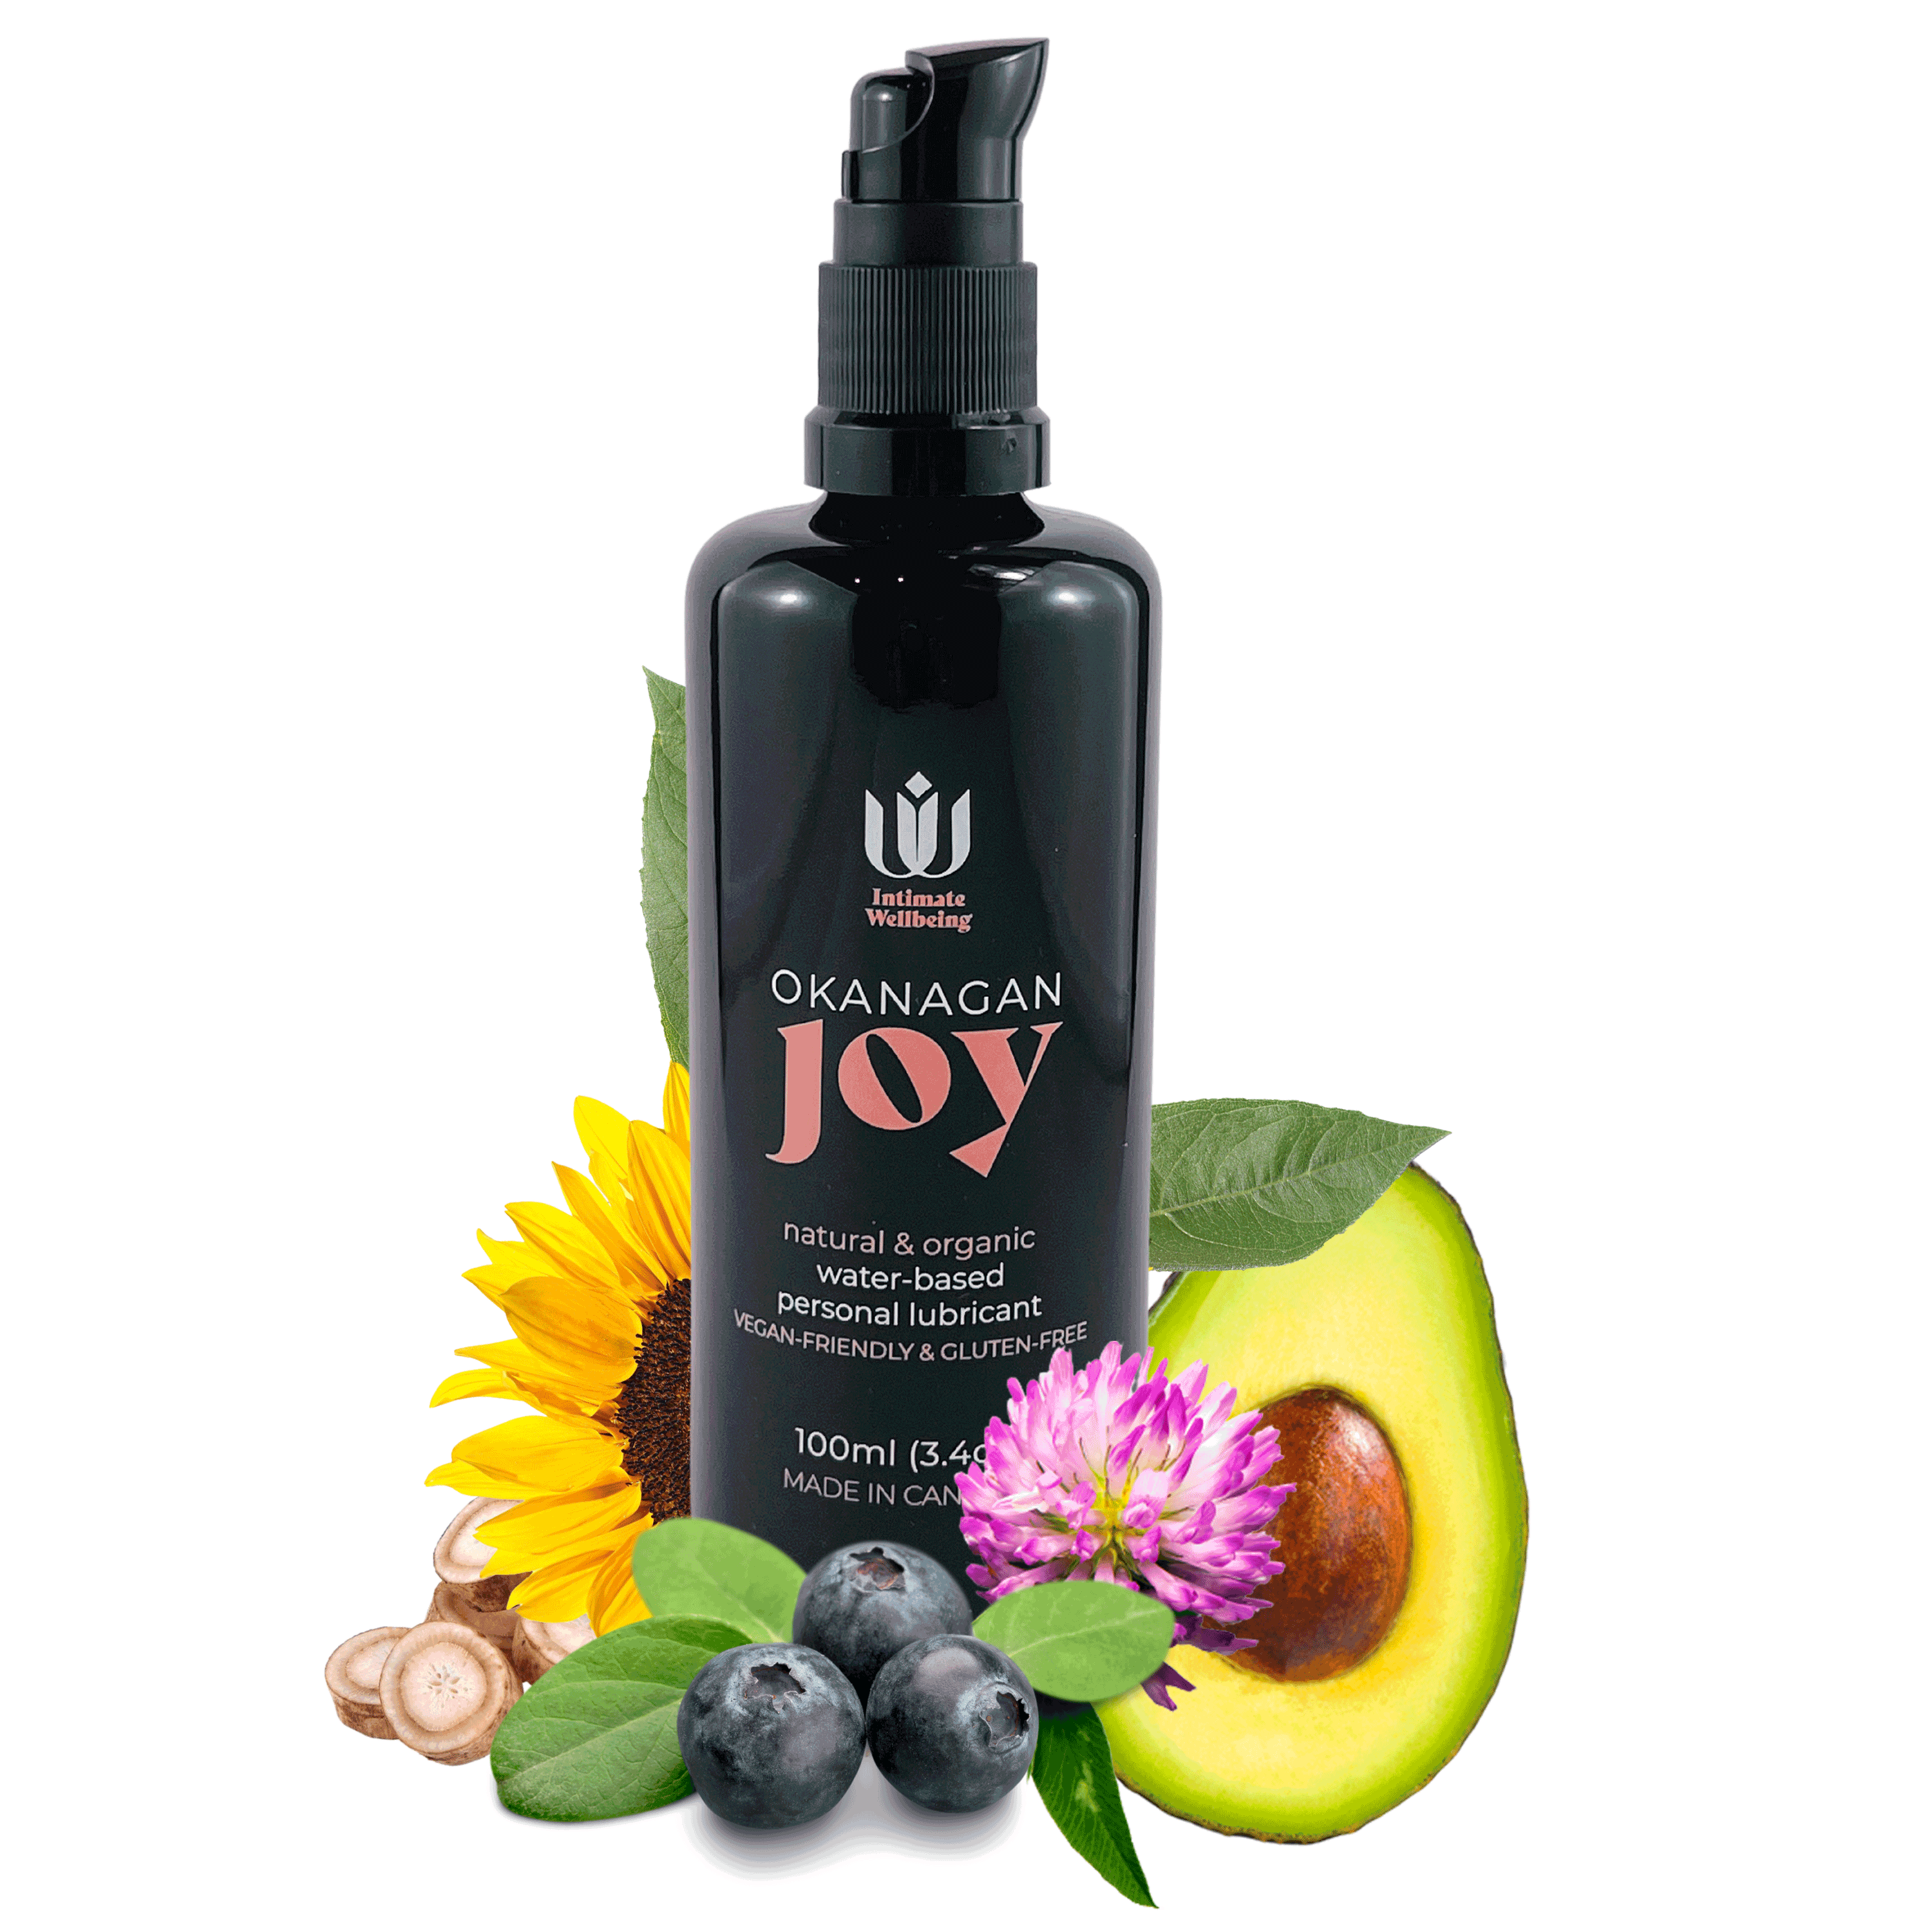 Single bottle of natural water-based personal lubricant Okanagan Joy, surrounded by natural ingredients like sunflower, blueberry, and avocado.